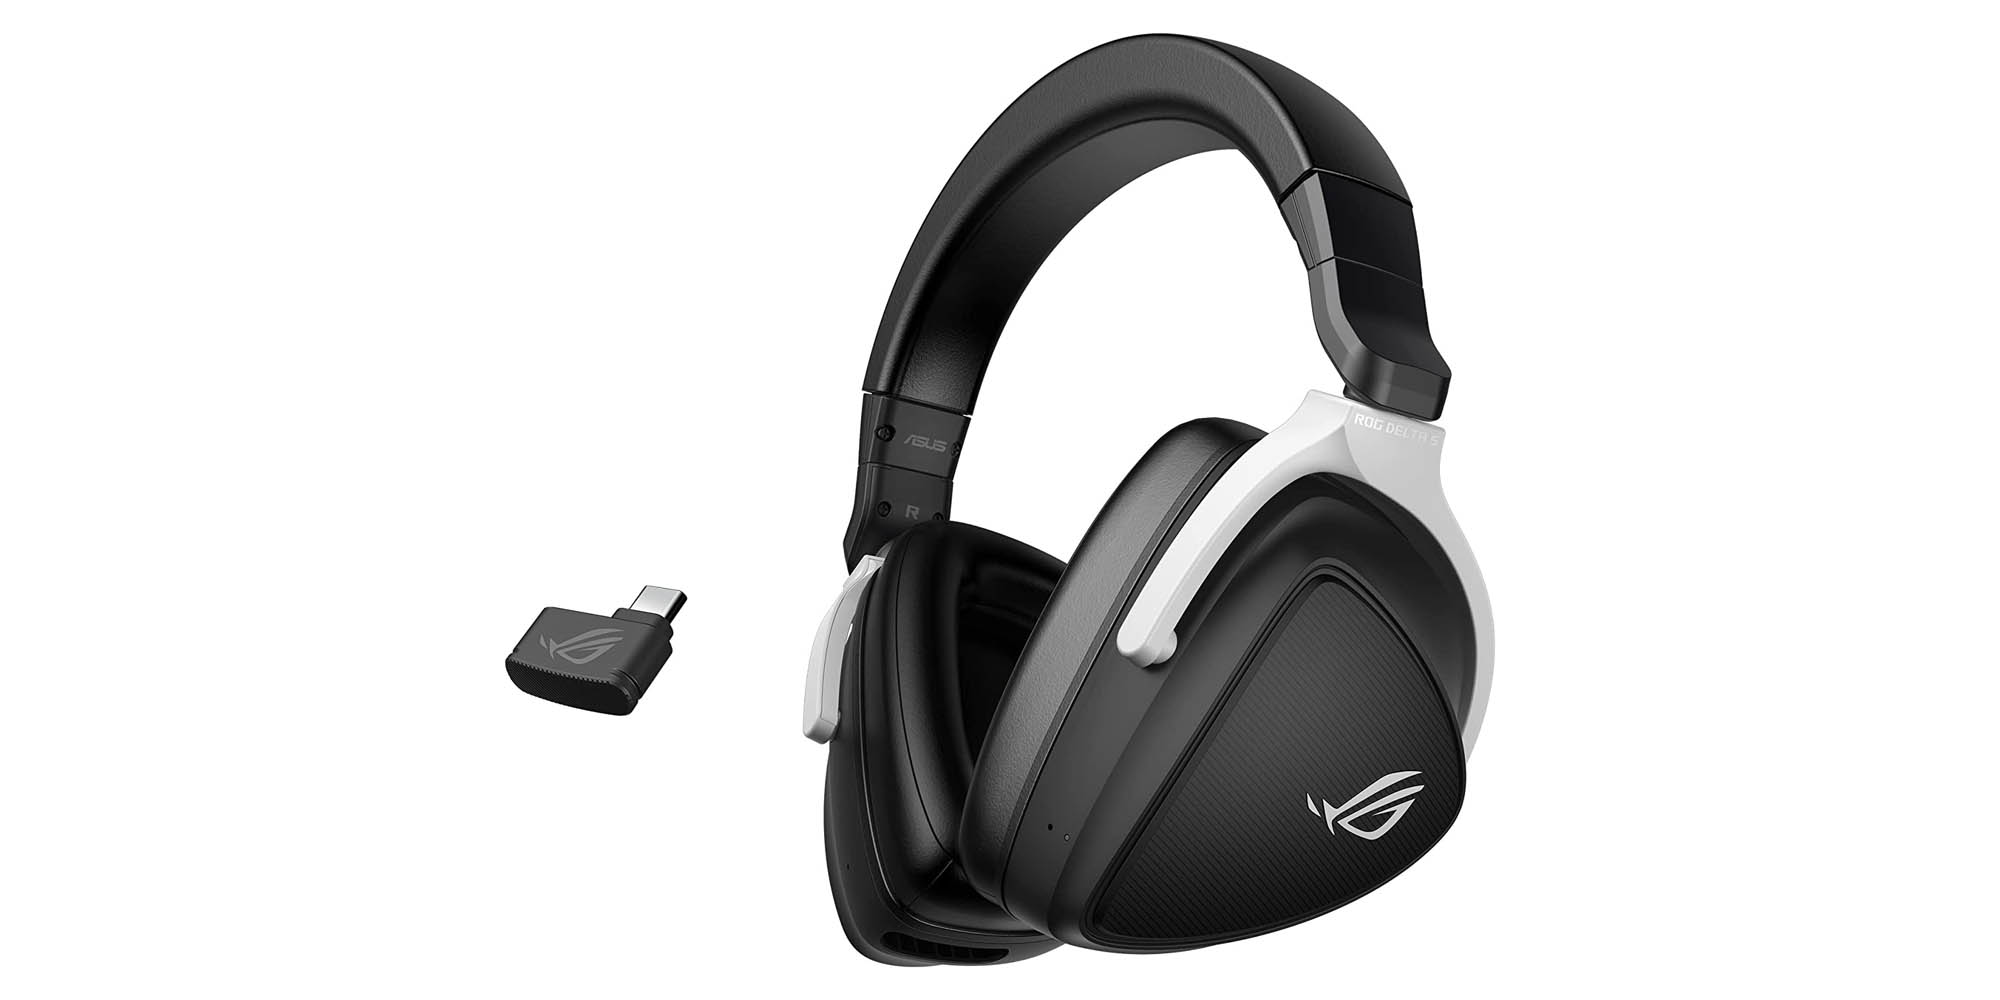 ASUS' ROG Delta S Gaming Headset connects over USB-C wireless